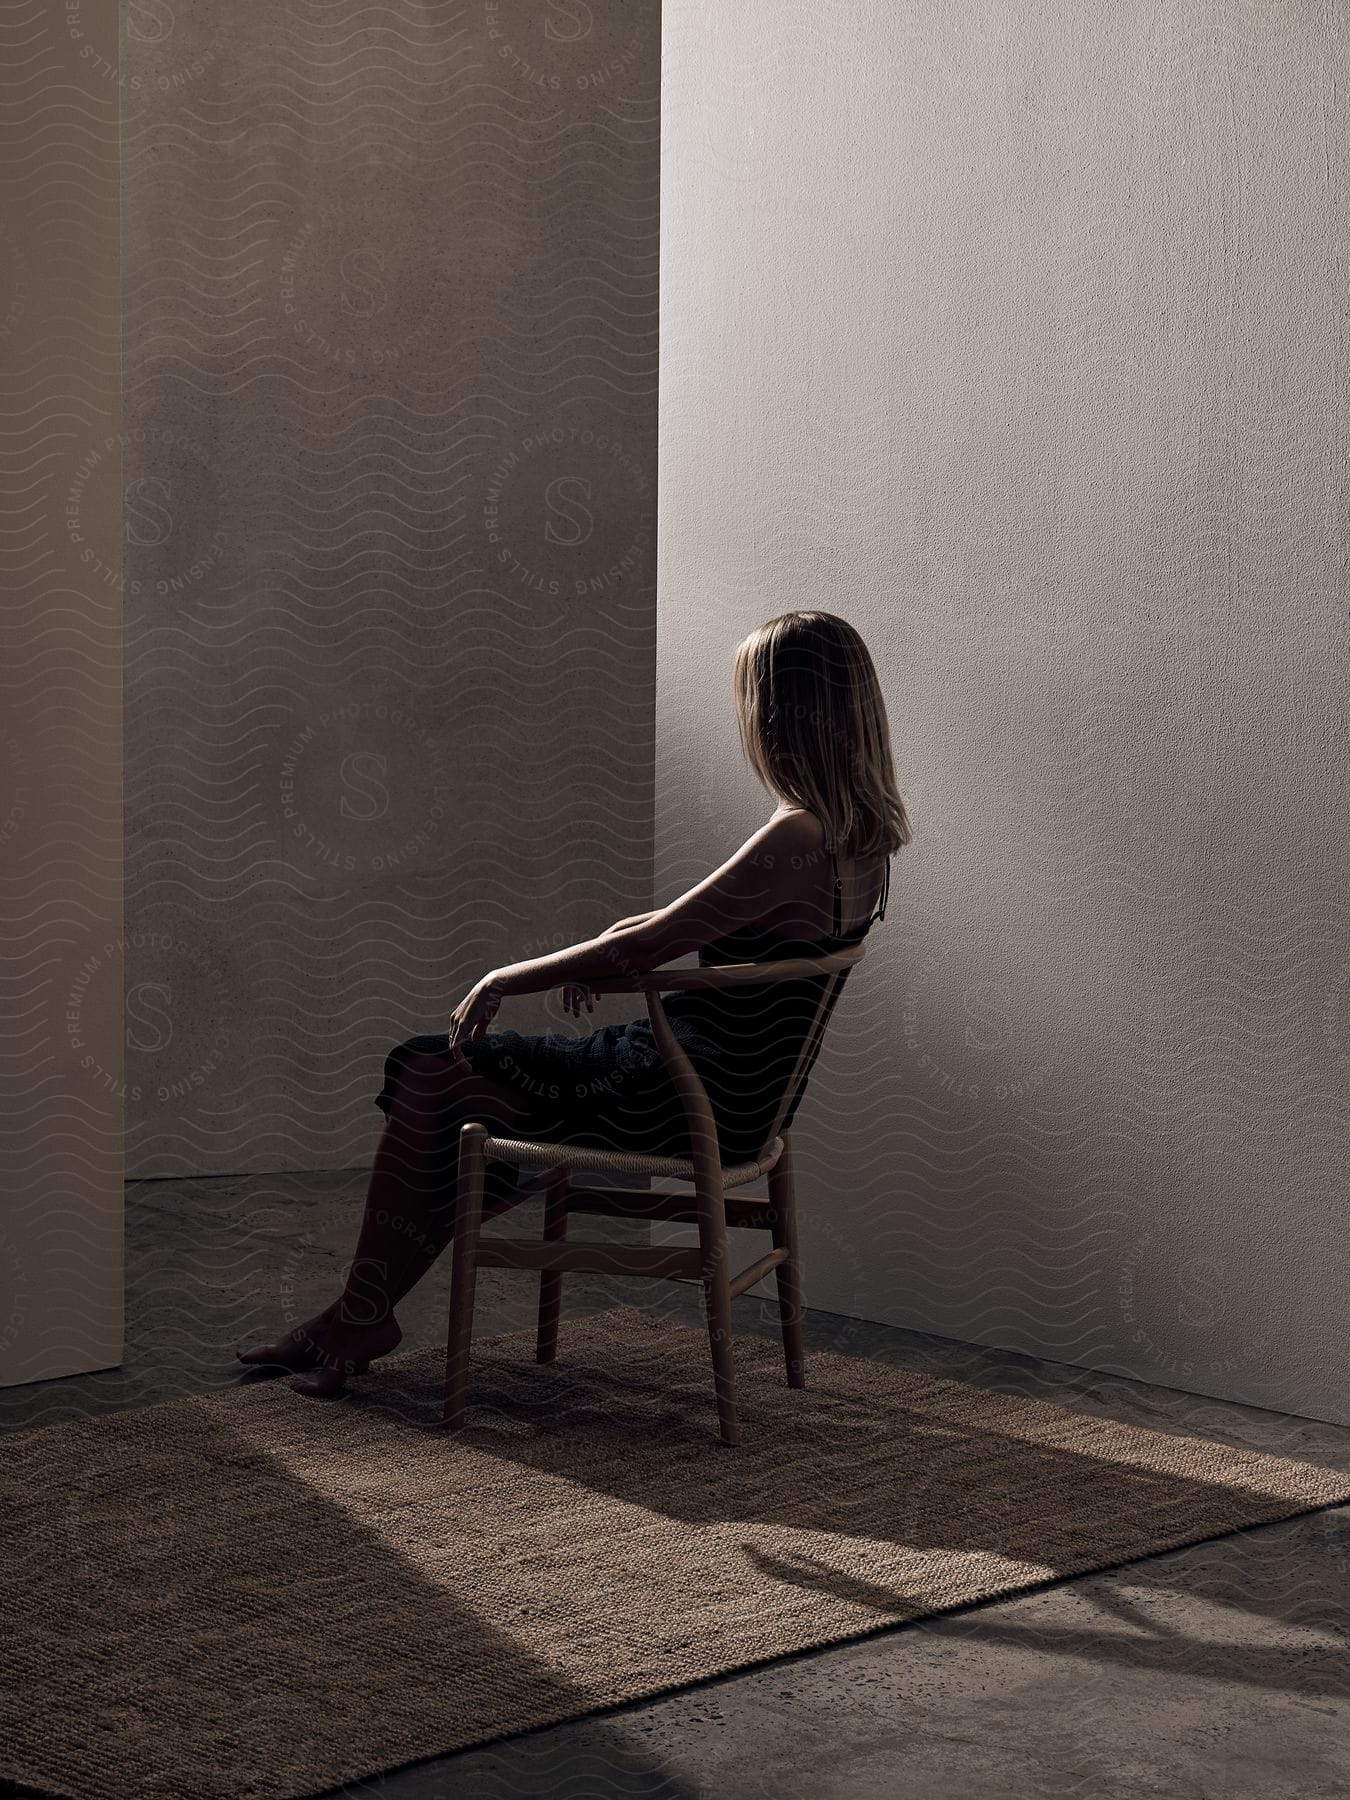 Blonde Woman Sitting In A Chair On A Carpet Near A Wall